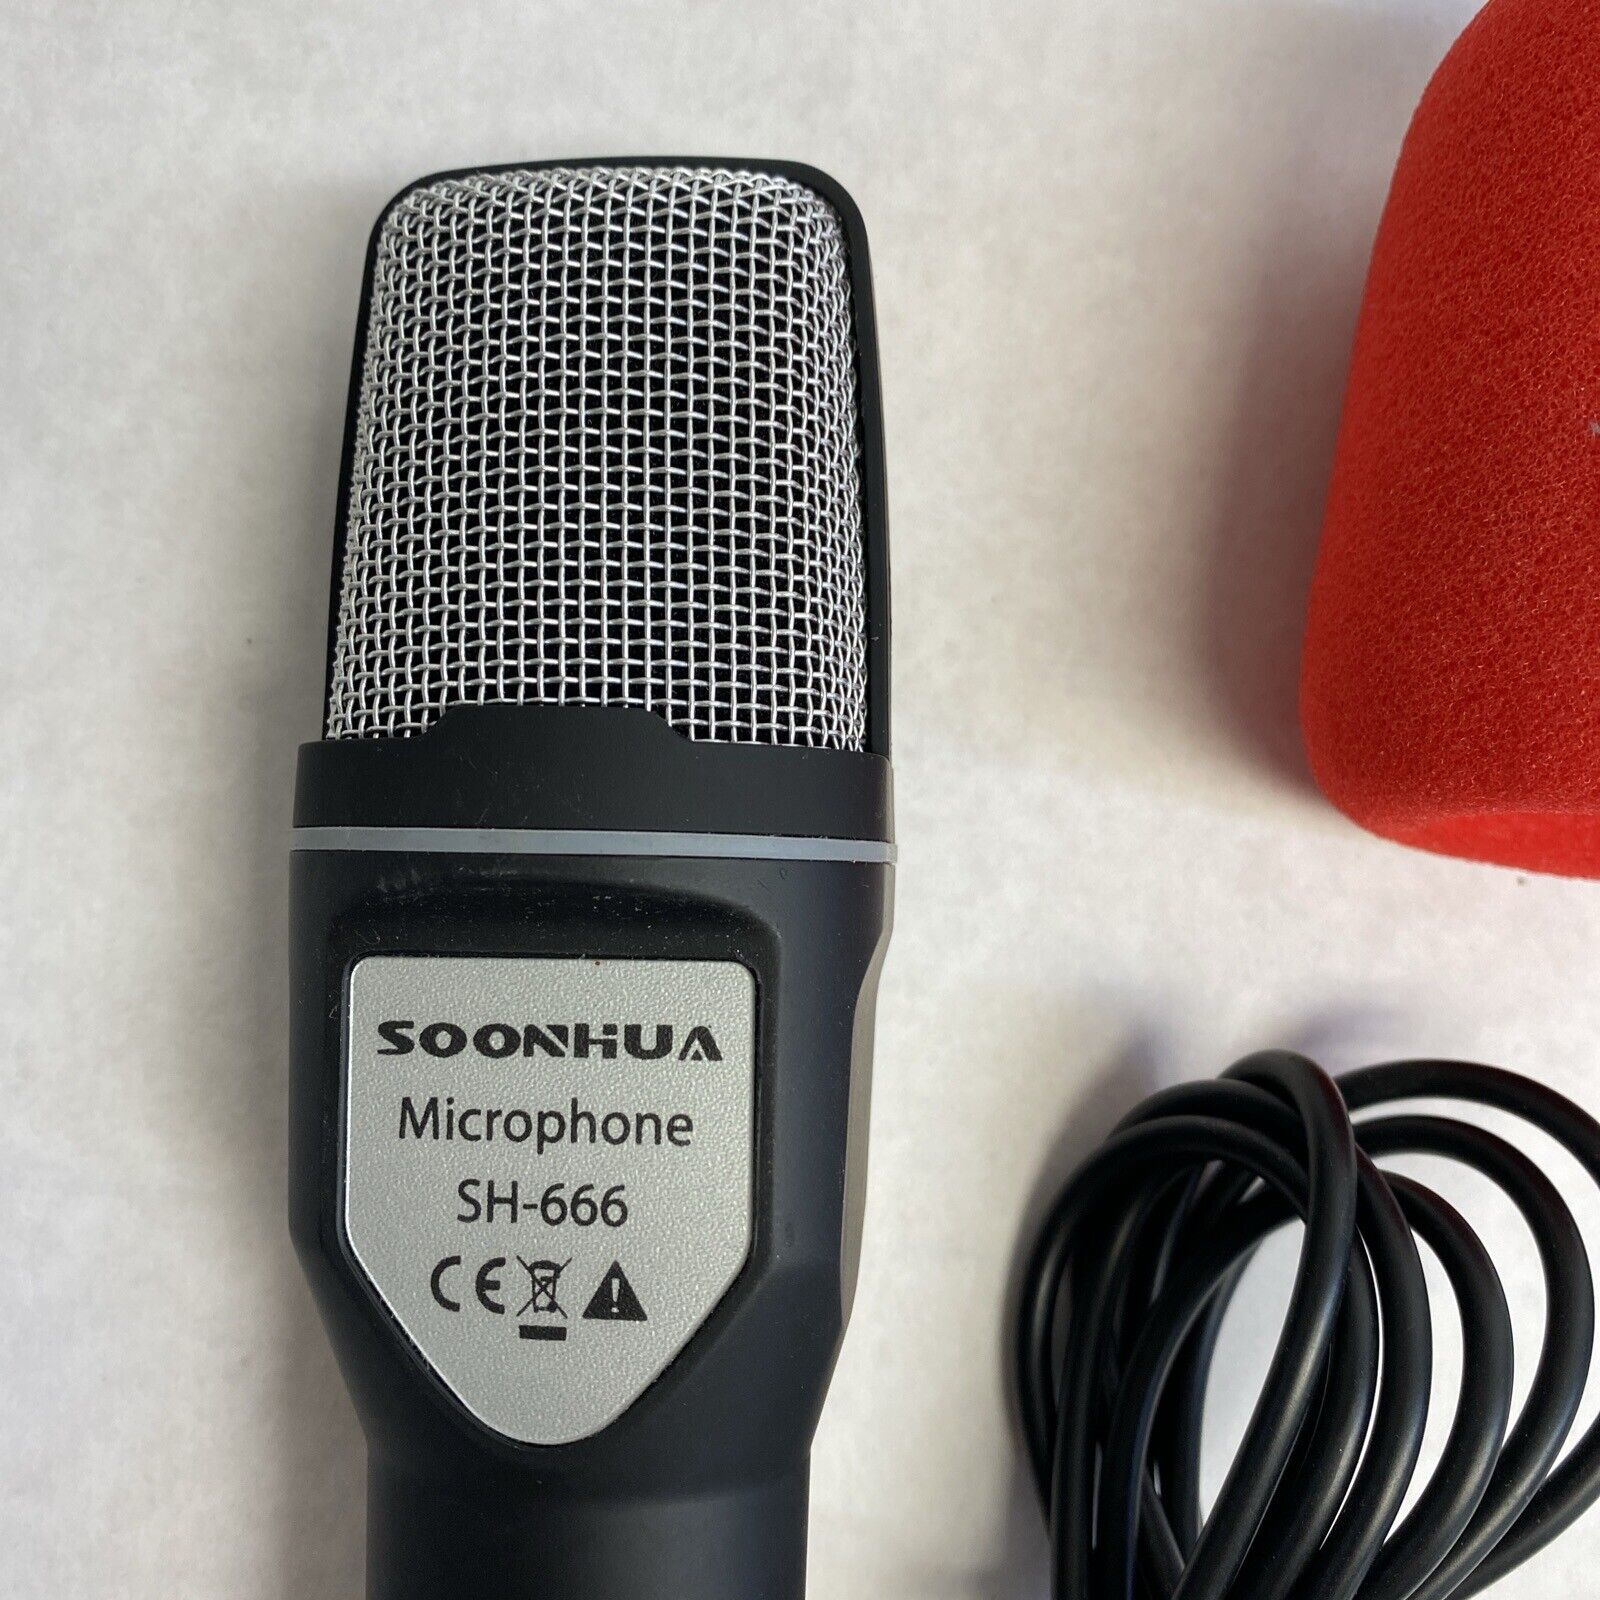 Soonhua SH-666 Microphone ONLY 4ft 3.5mm Cable Tested NO ACCESSORIES